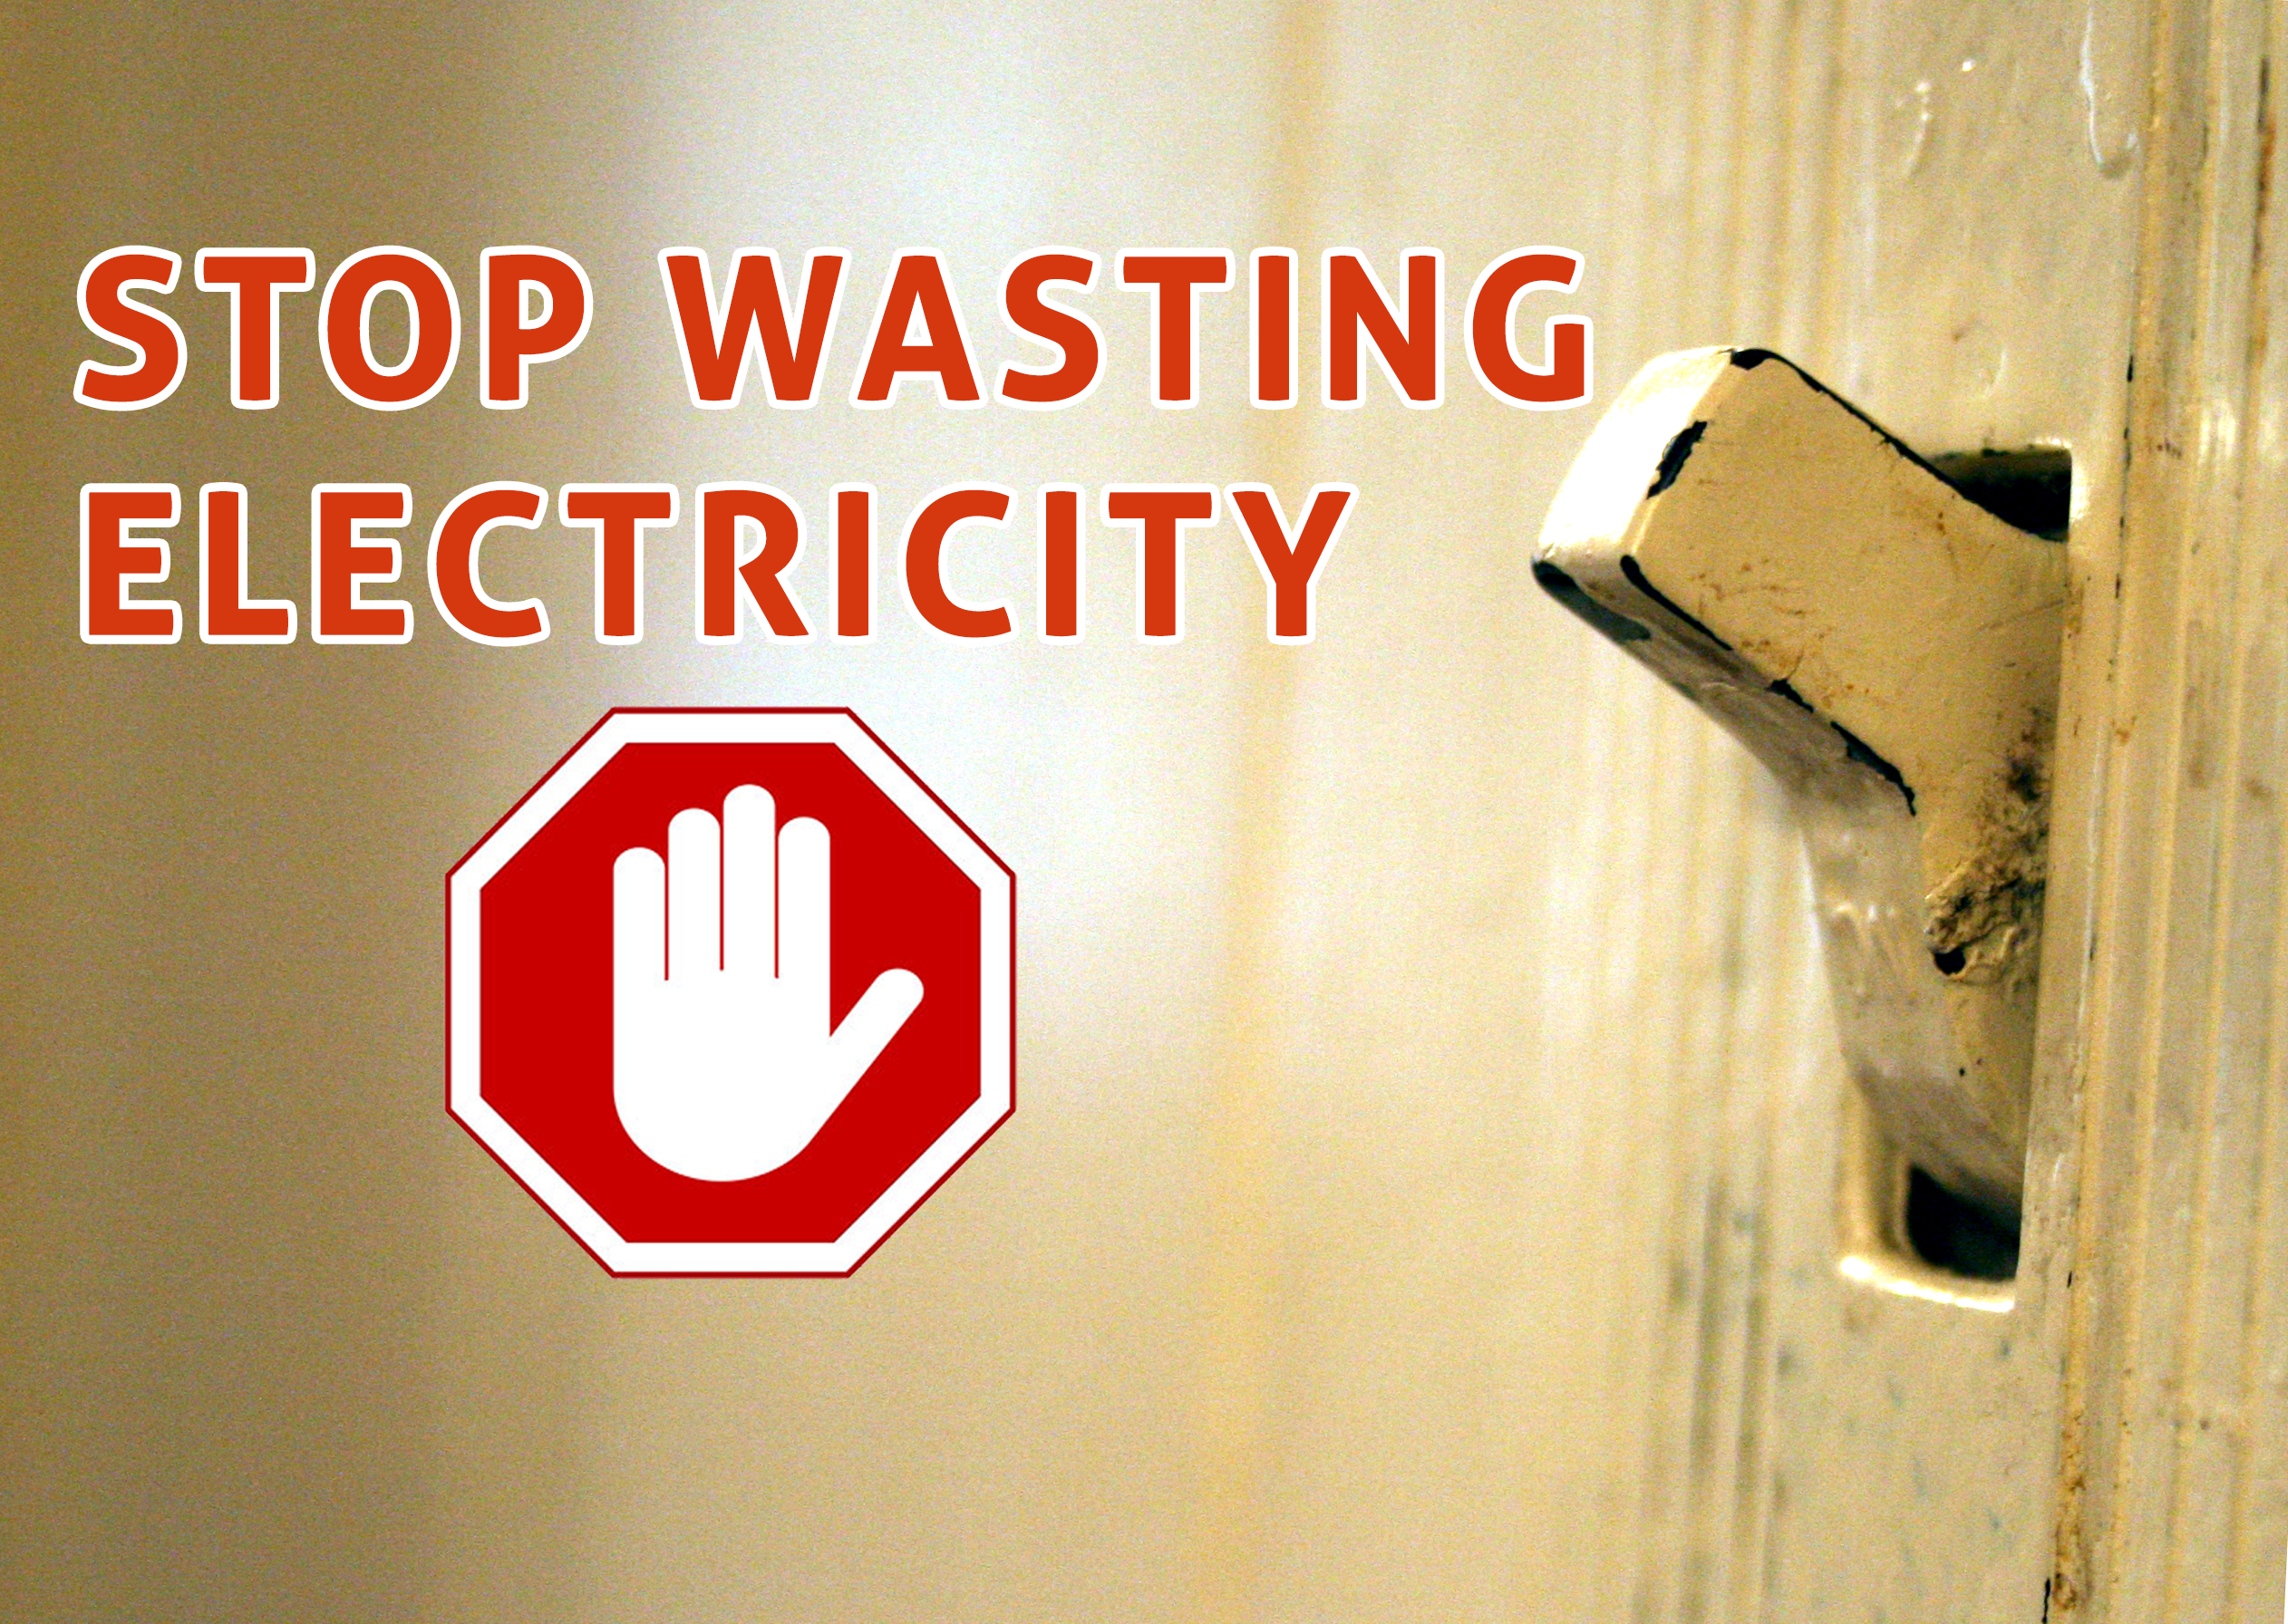 How to Reduce Electric Bills: Ways to Save Energy Easily